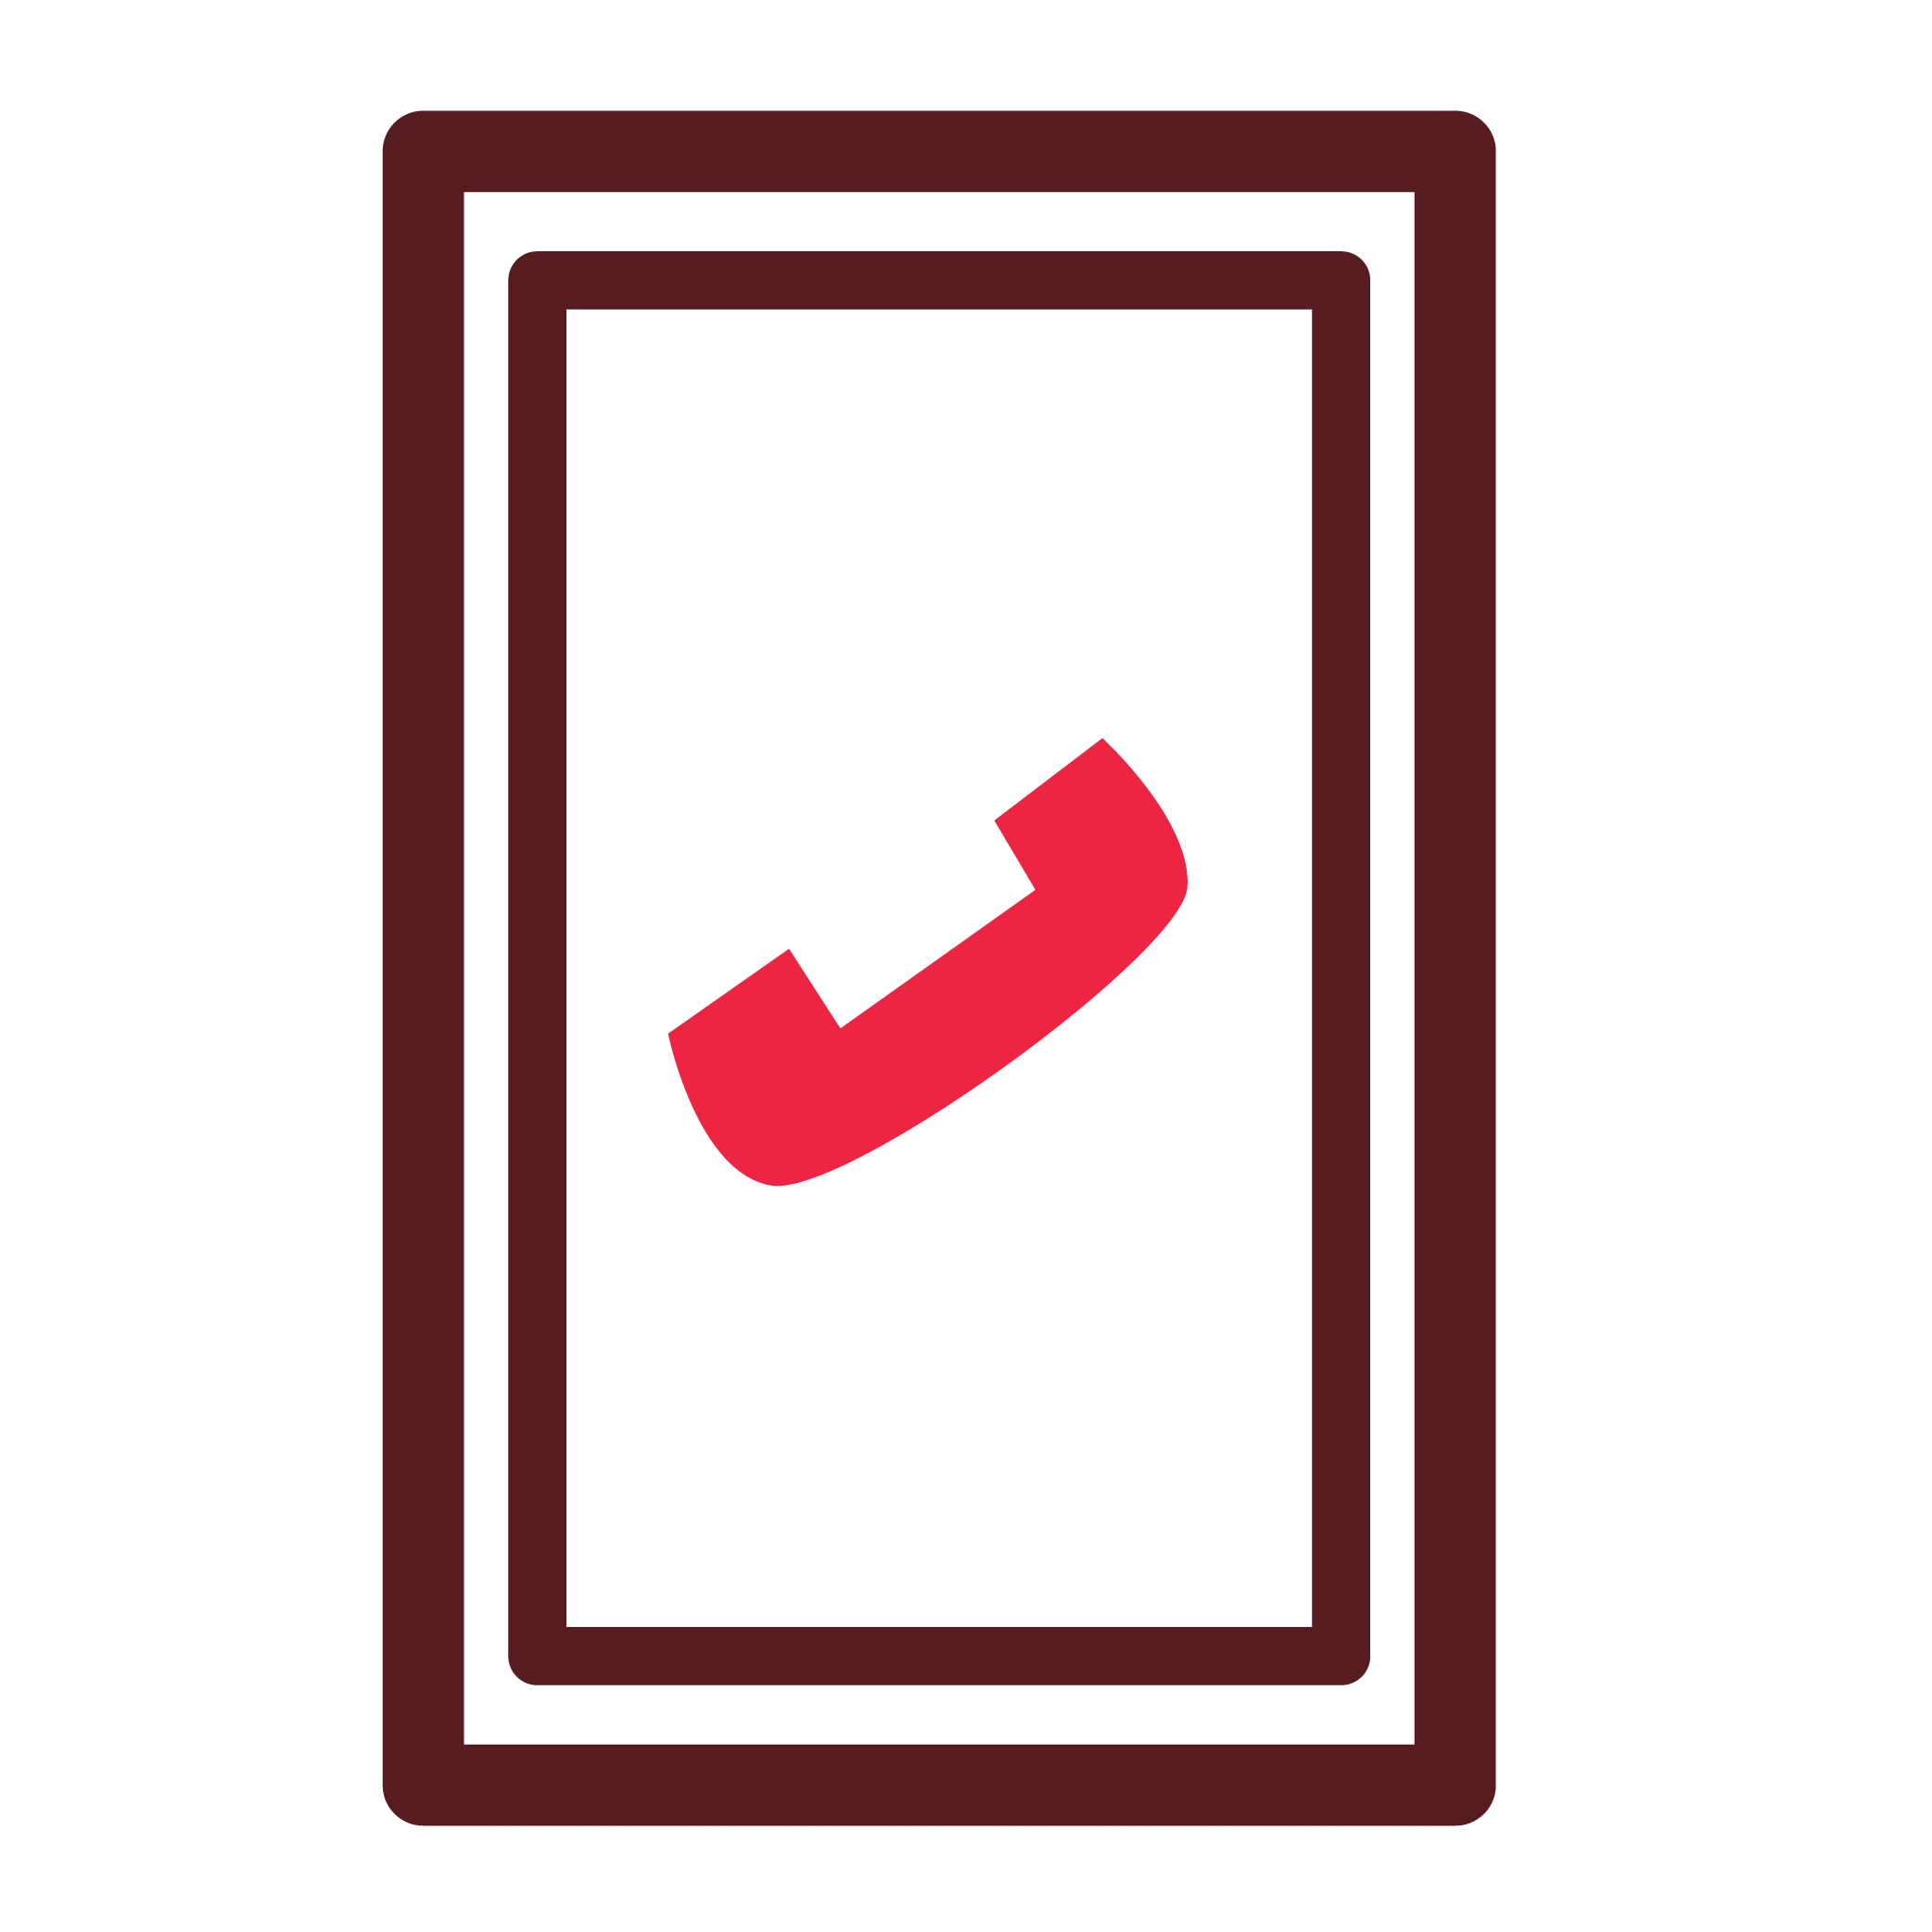 Illustration of a Cell Phone